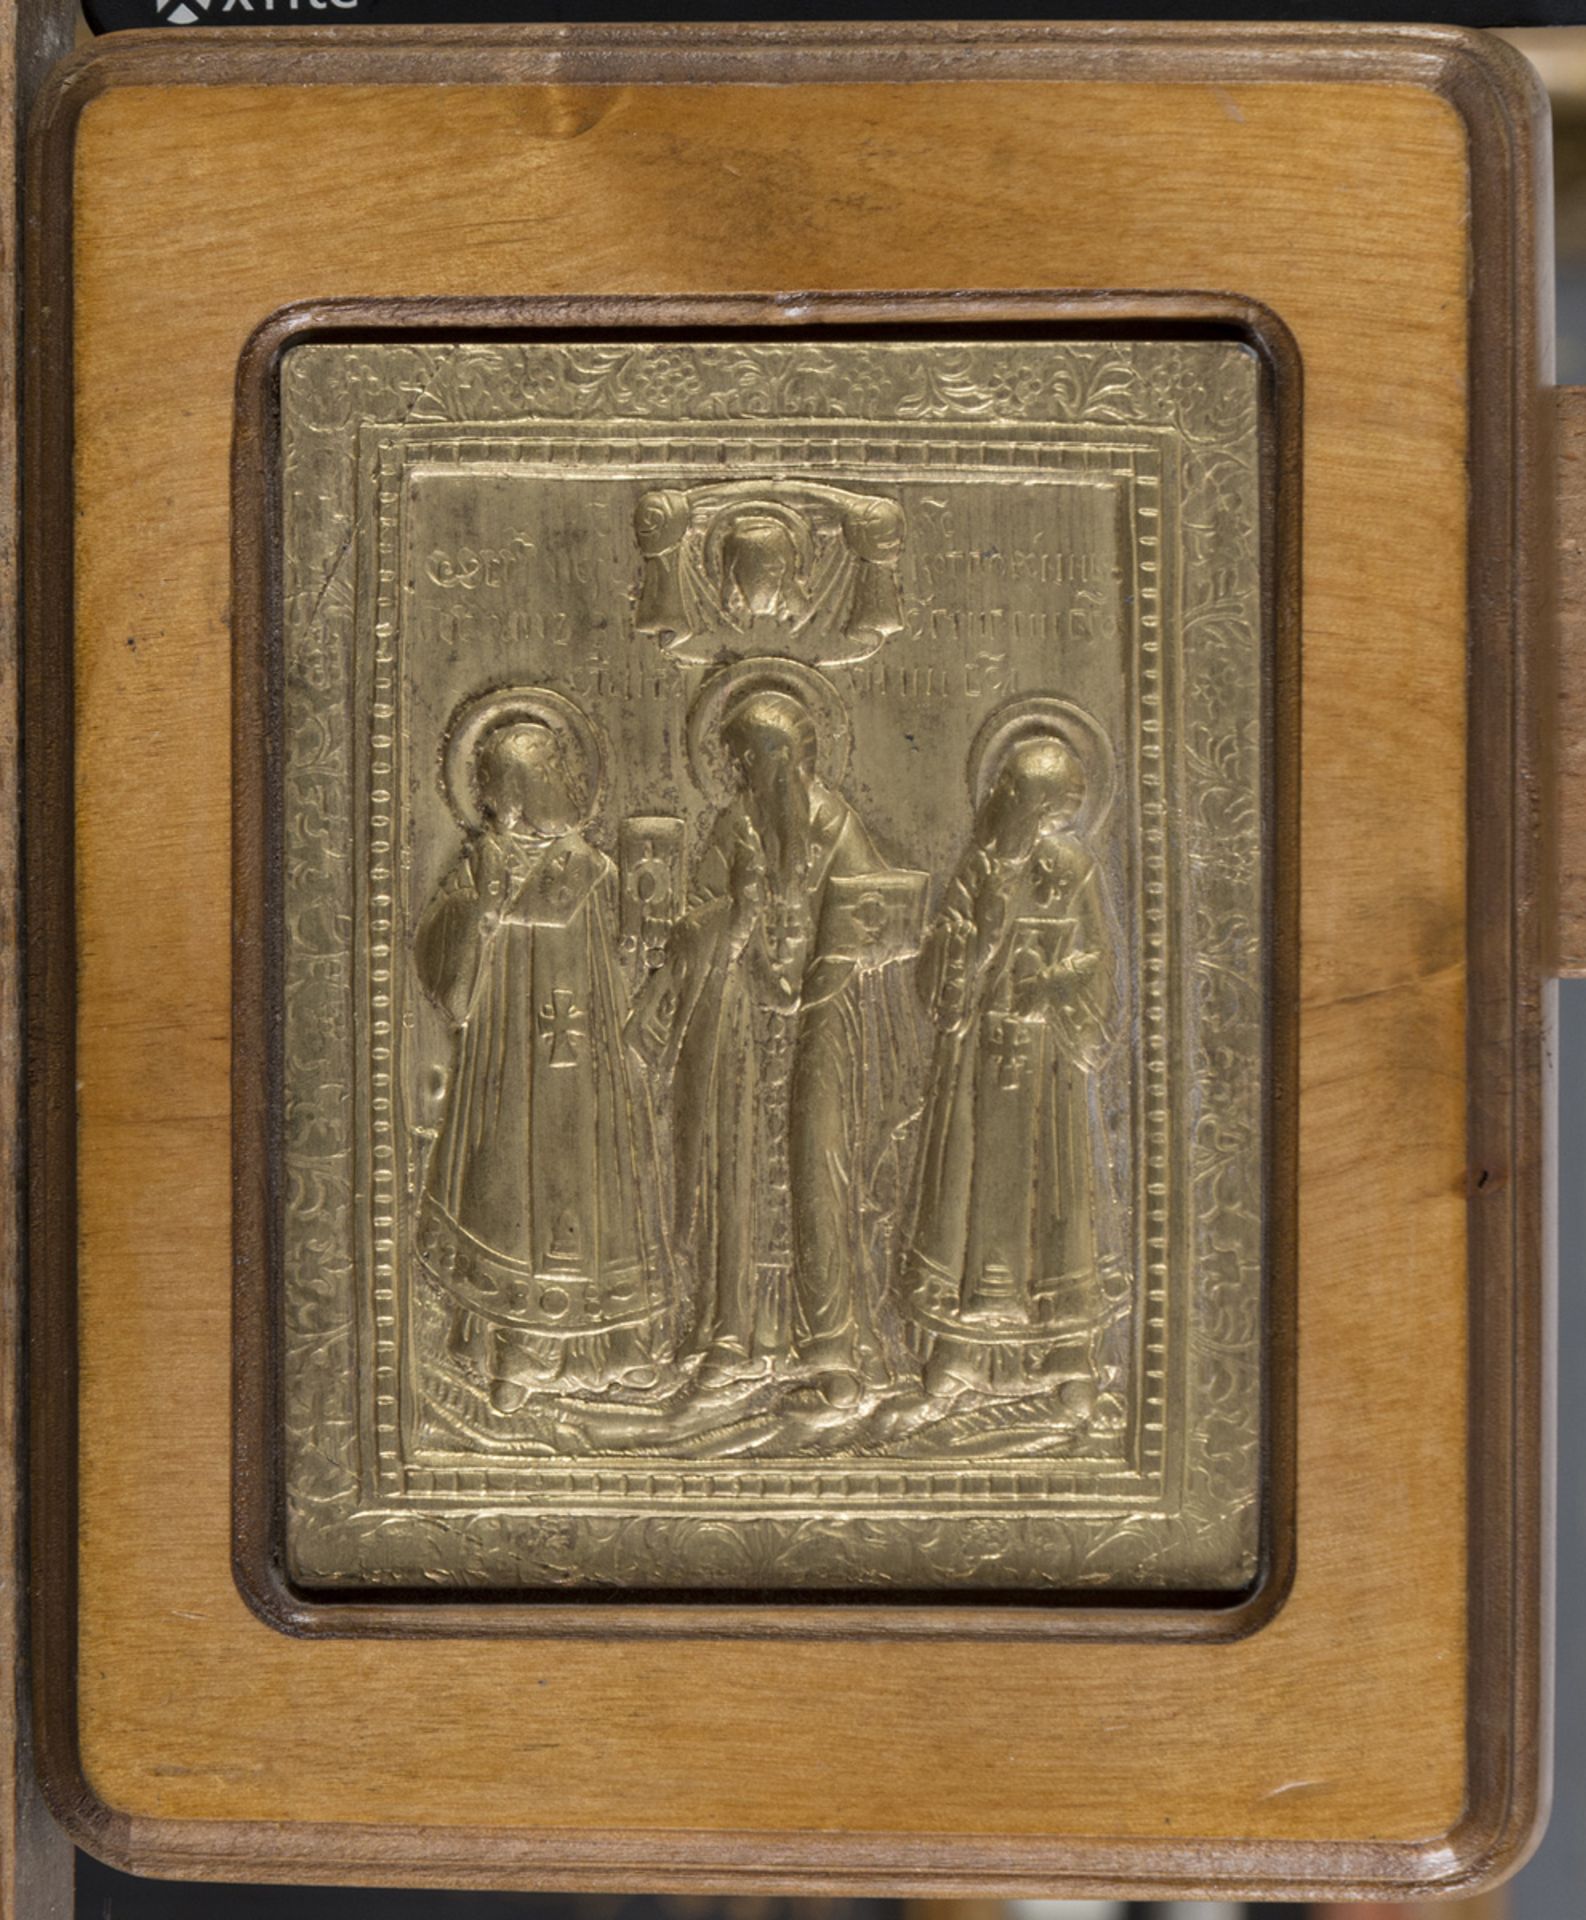 SMALL BAS-RELIEF IN BRONZE, PROBABLY RUSSIA EARLY 20TH CENTURY with gilded patina, representing